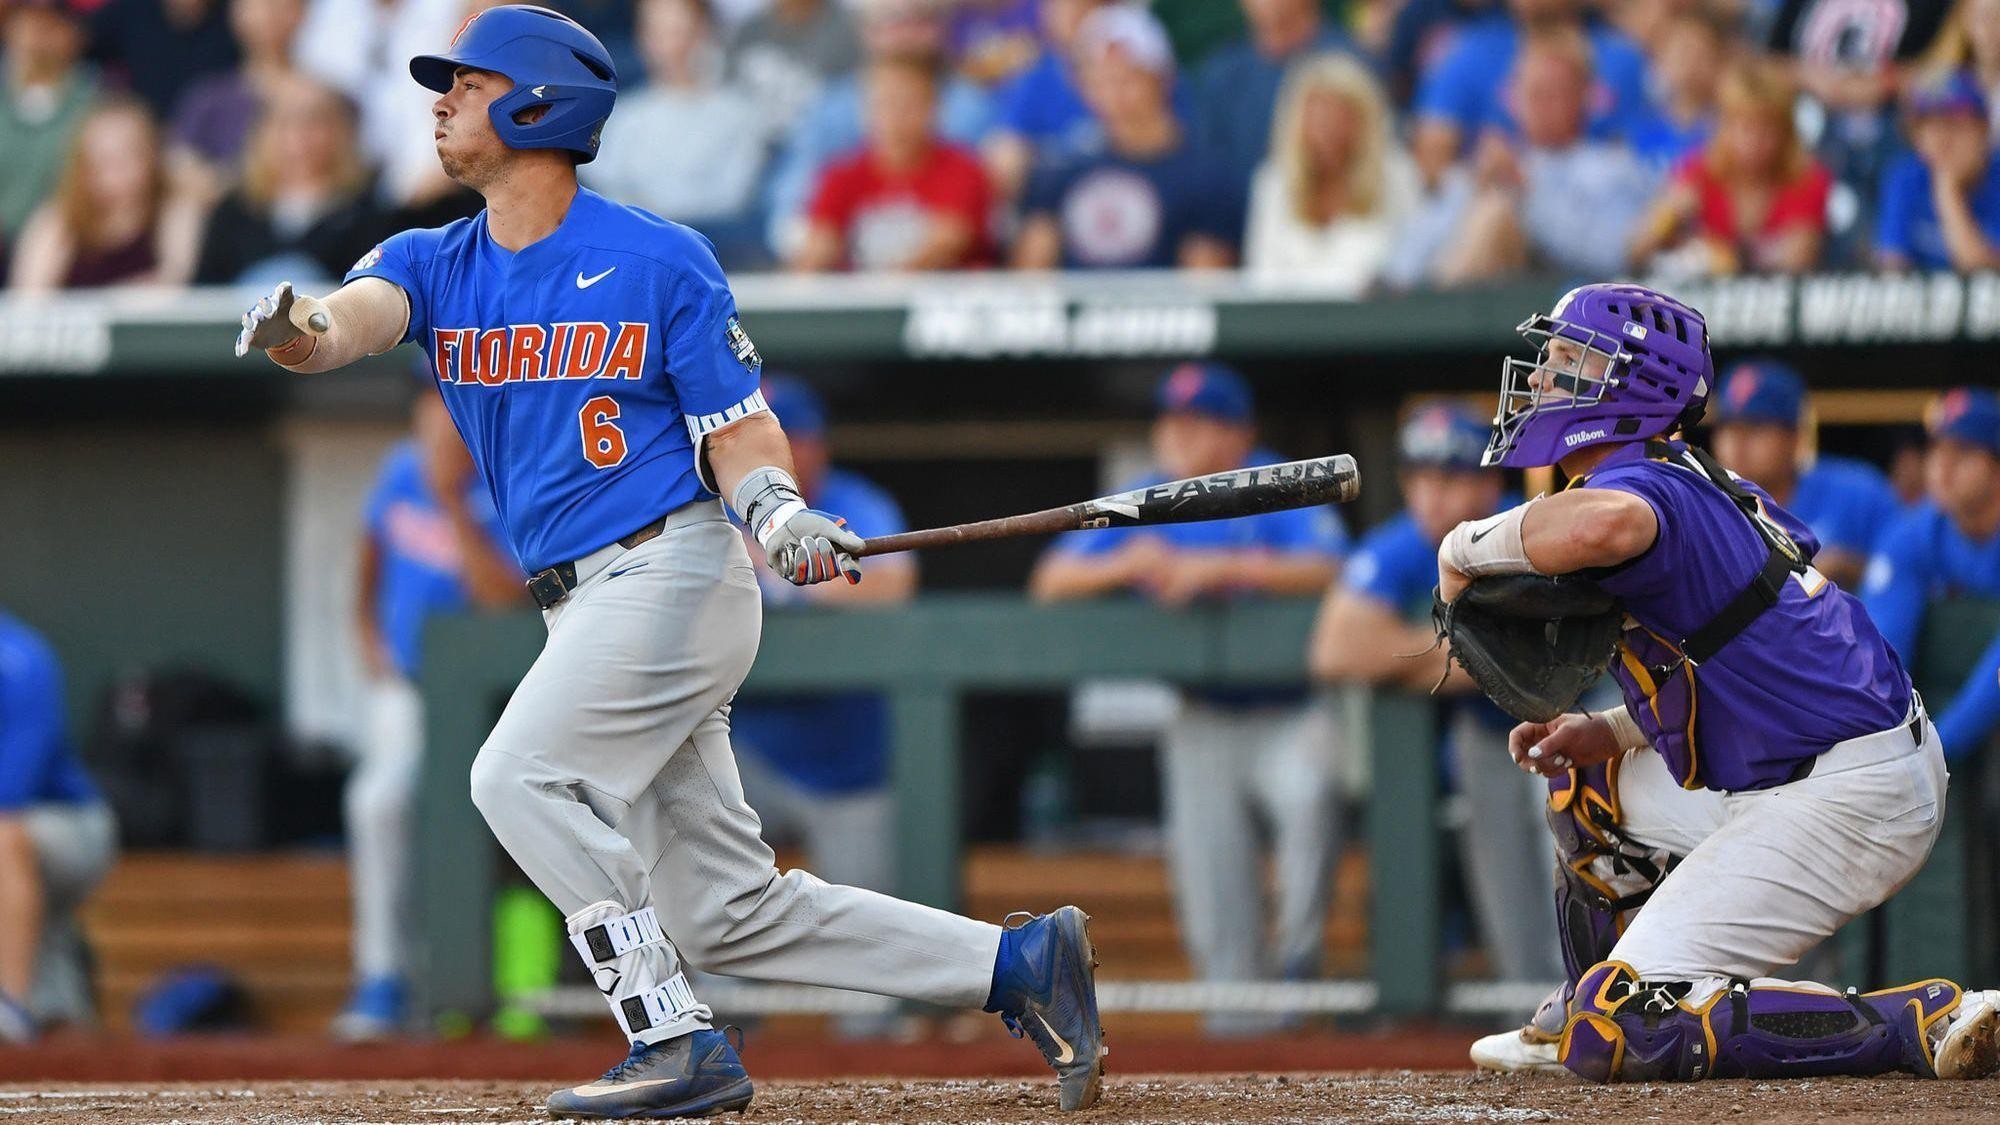 Top-ranked UF baseball team poised to defend national title